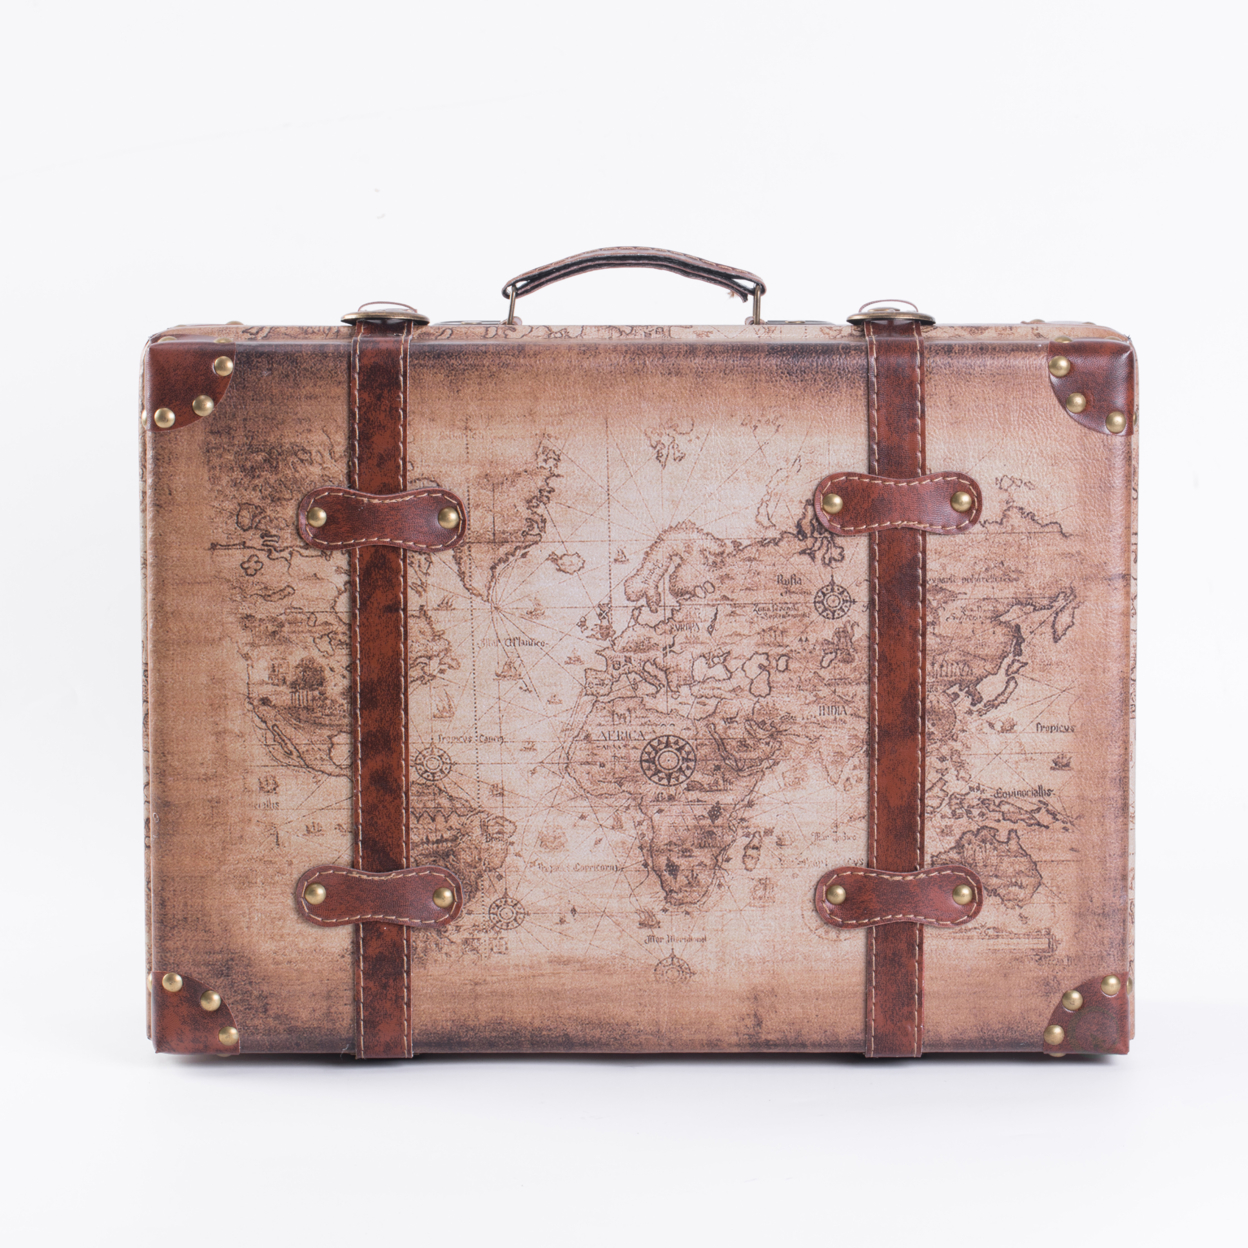 Set of 2 Vintage-Style World Map Leather Suitcase Trunks with Straps and Handle - image 2 of 6